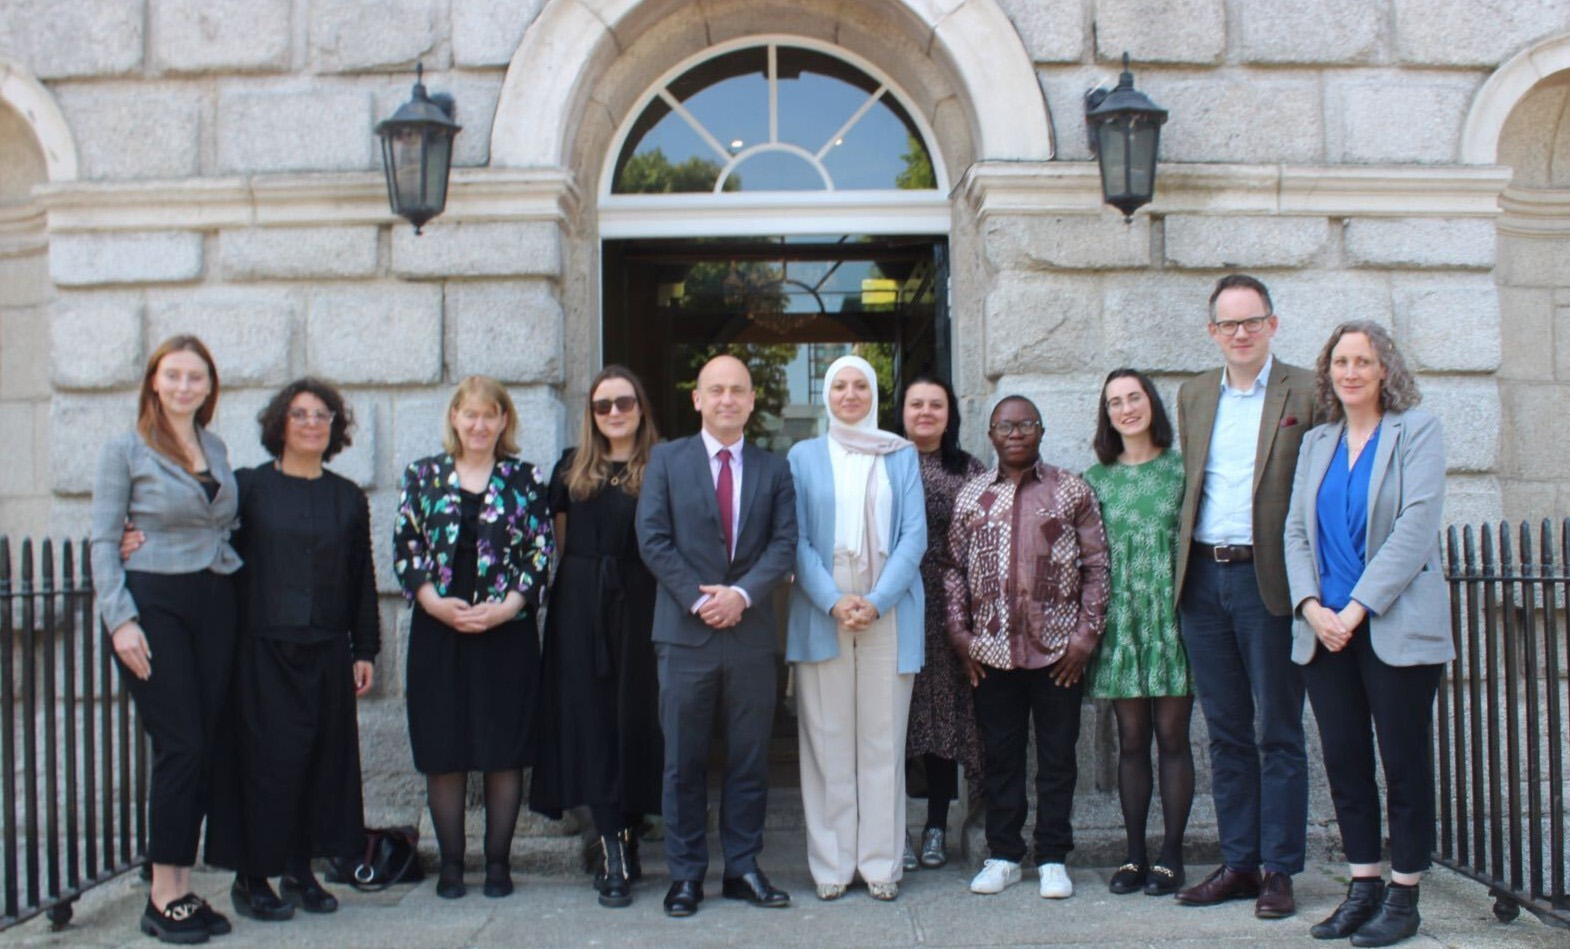 #InPictures: Human rights defenders welcomed in Dublin